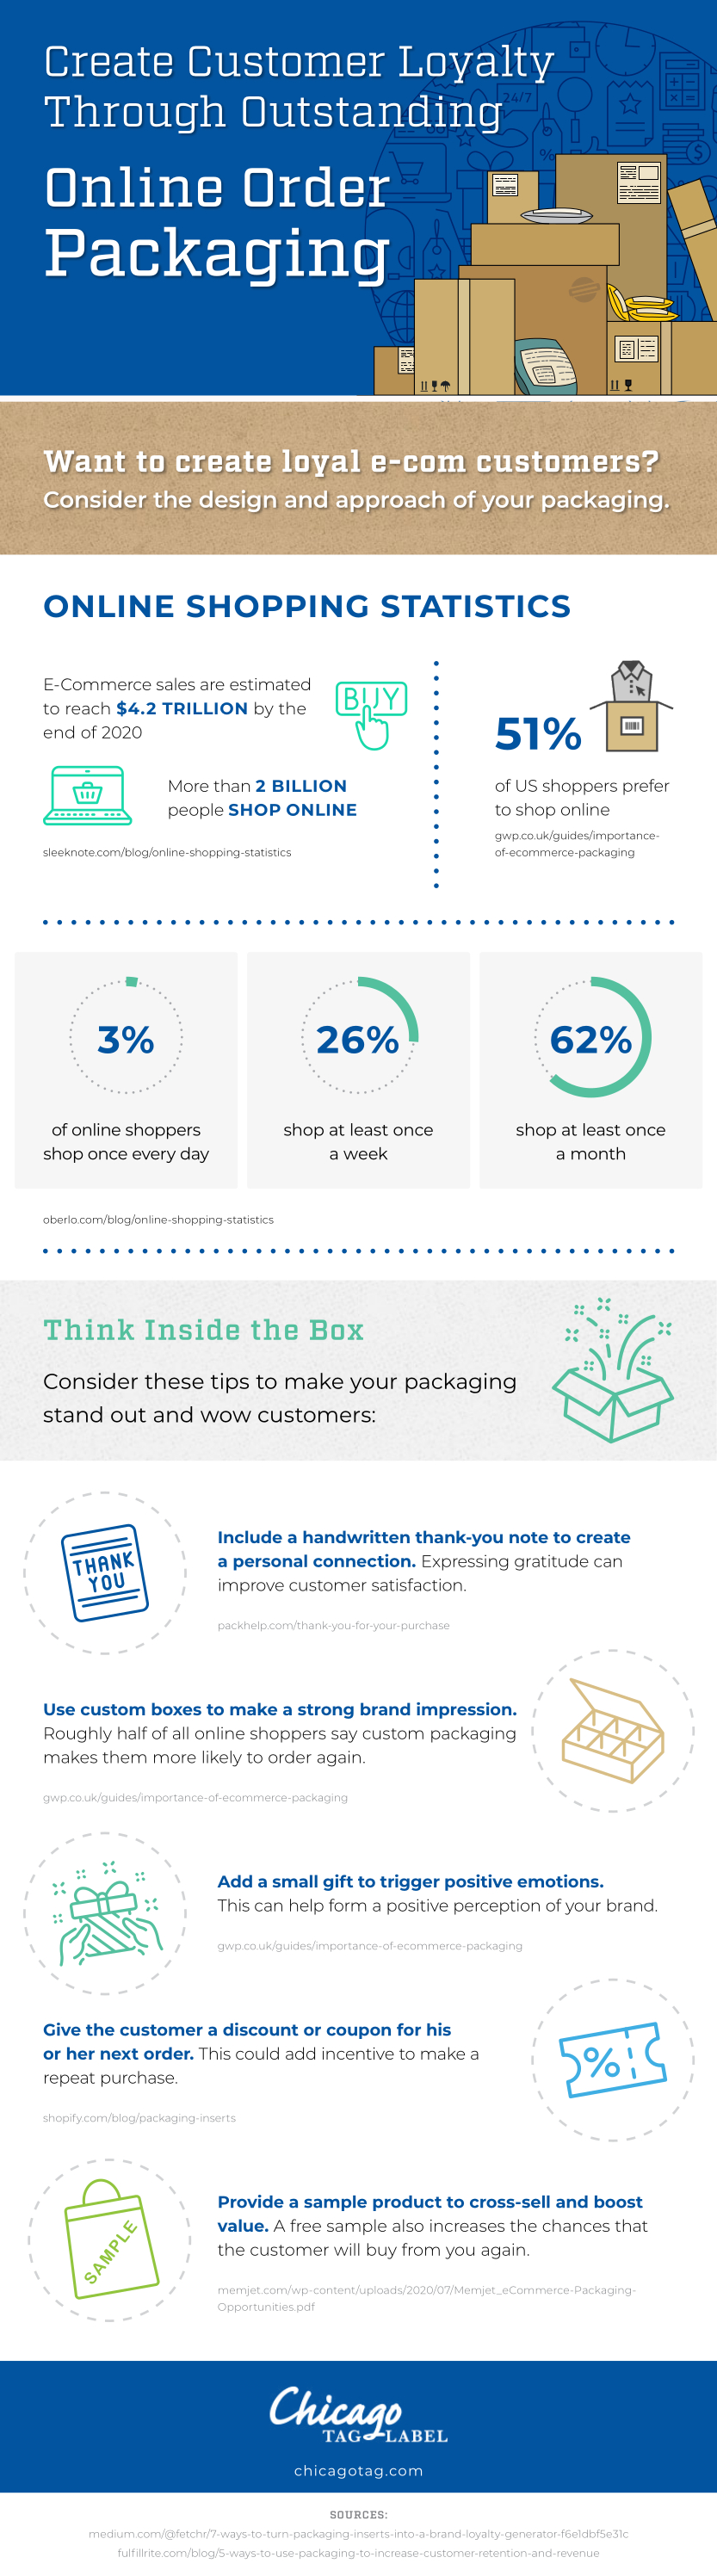 Chicago Tag Label infographic on how packaging increases customer loyalty